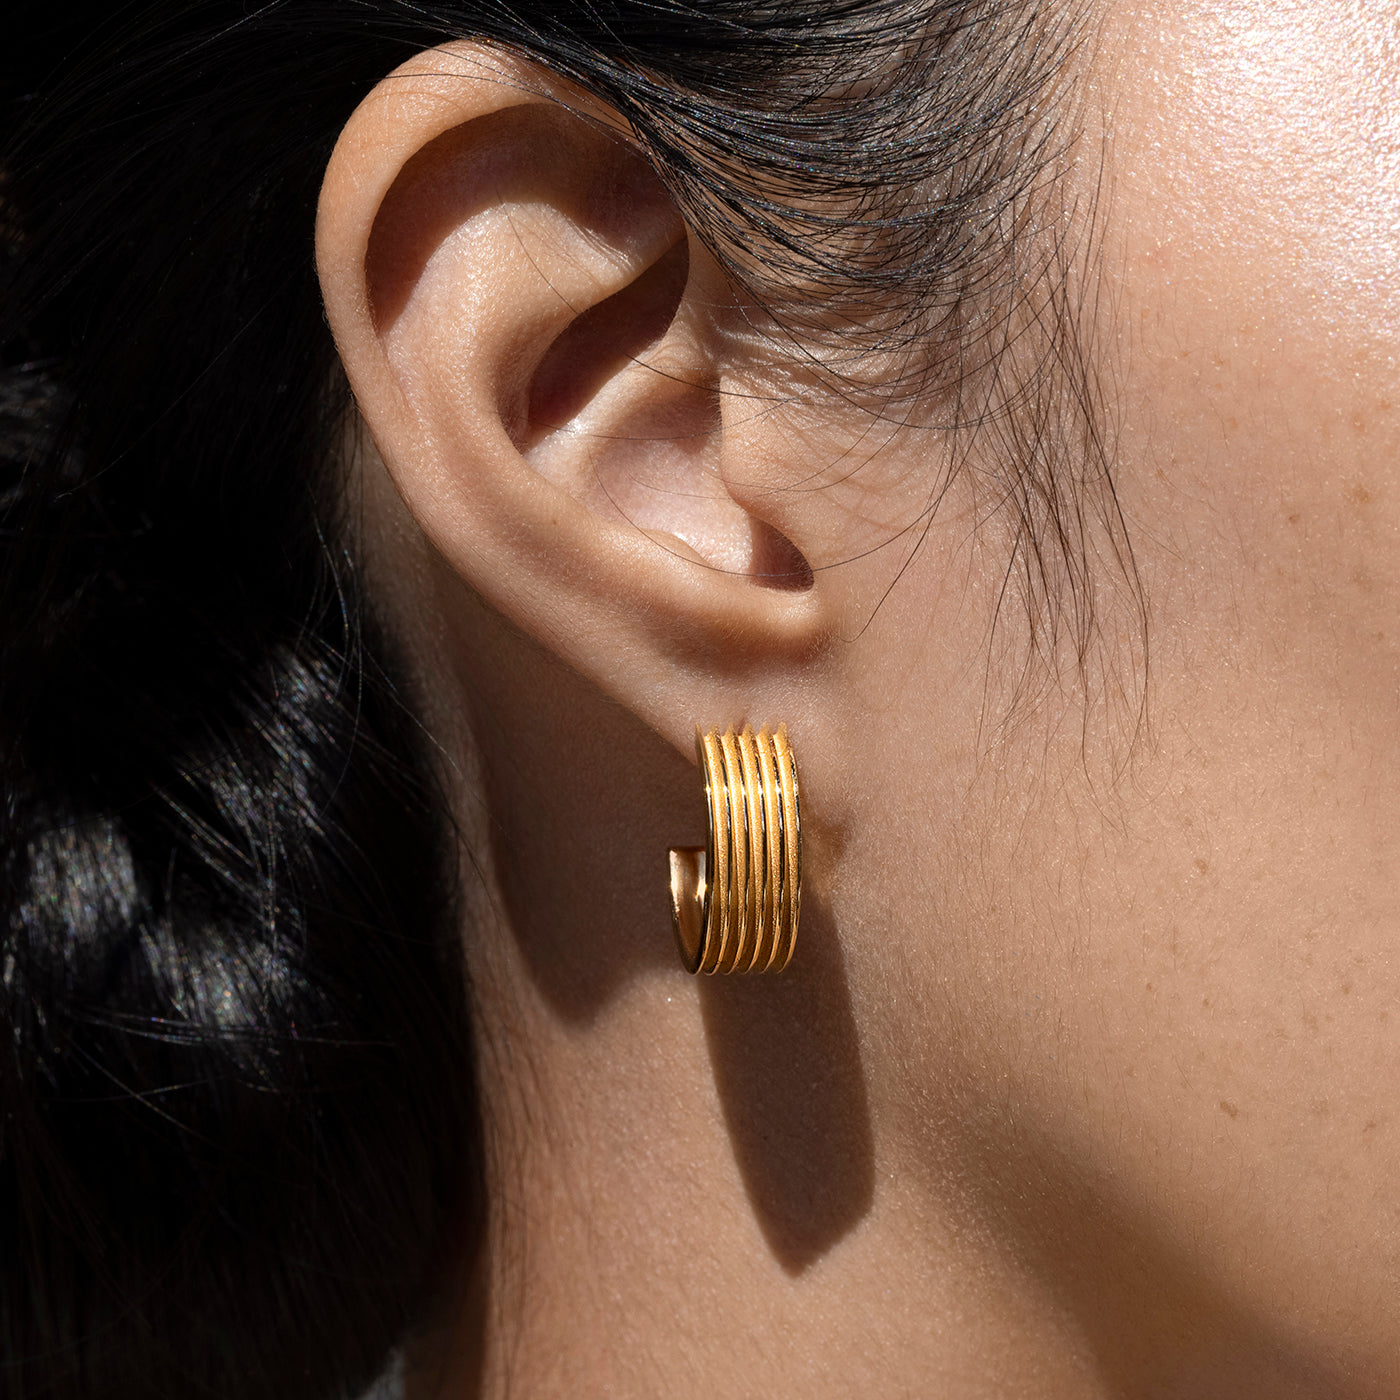 Close up of Woman's Ear Wearing a Small Ridged Ethical Gold Hoop Earring